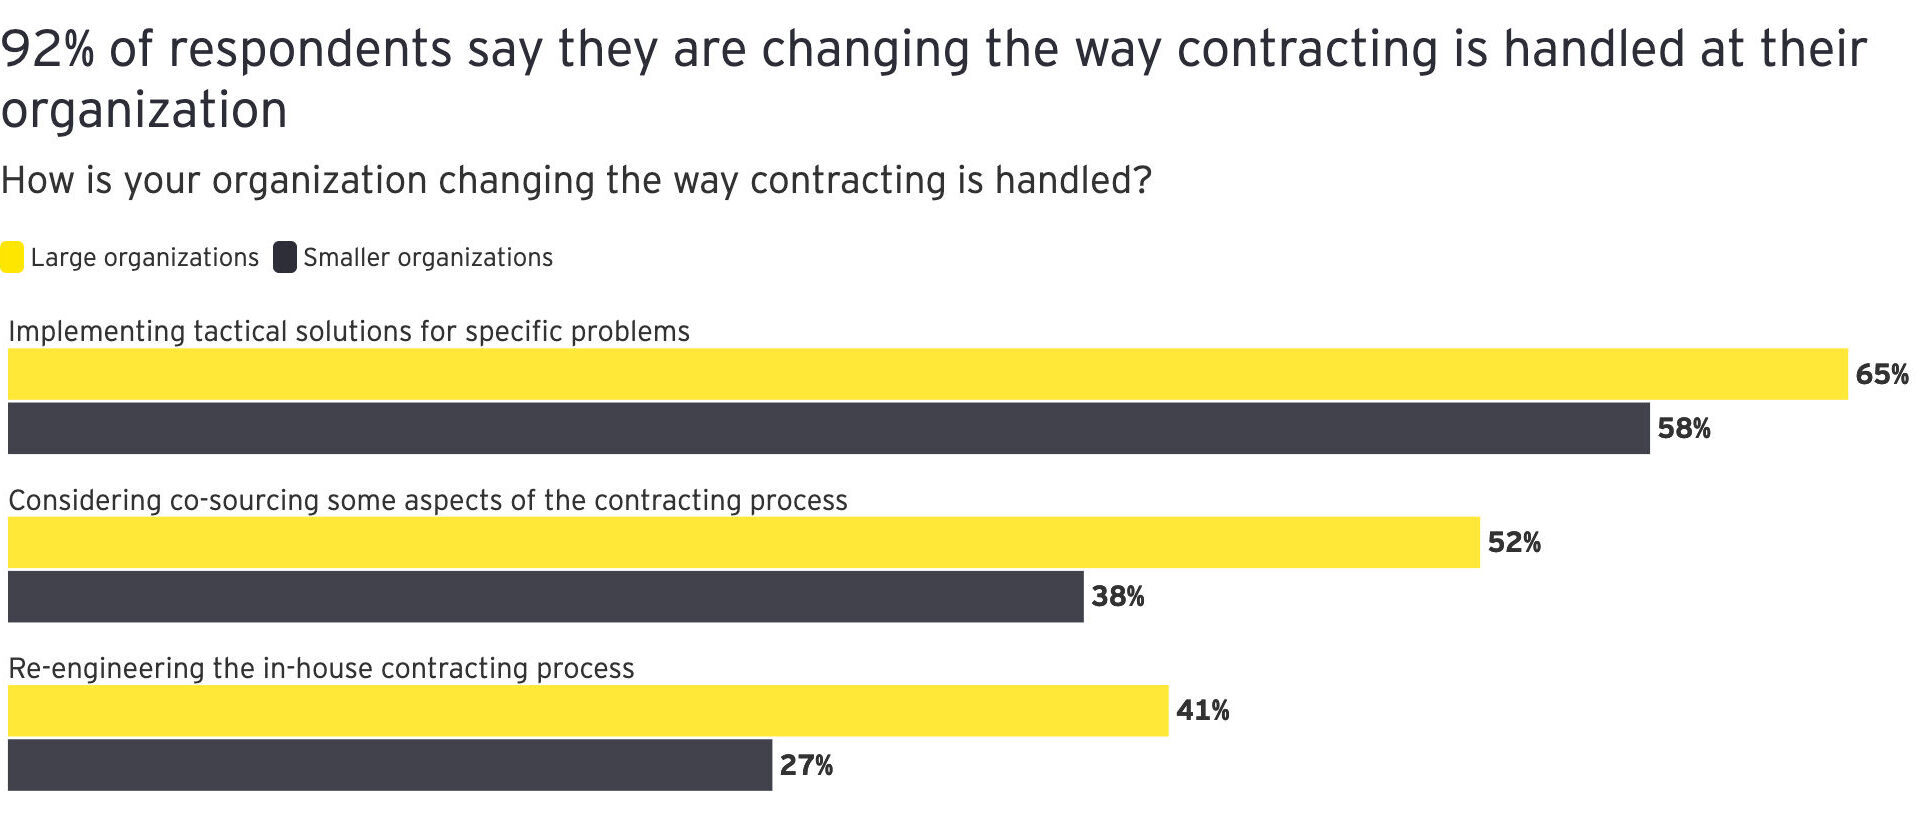 graph shows that 92% of survey respondents say they are changing the way contracting is handled at their organization